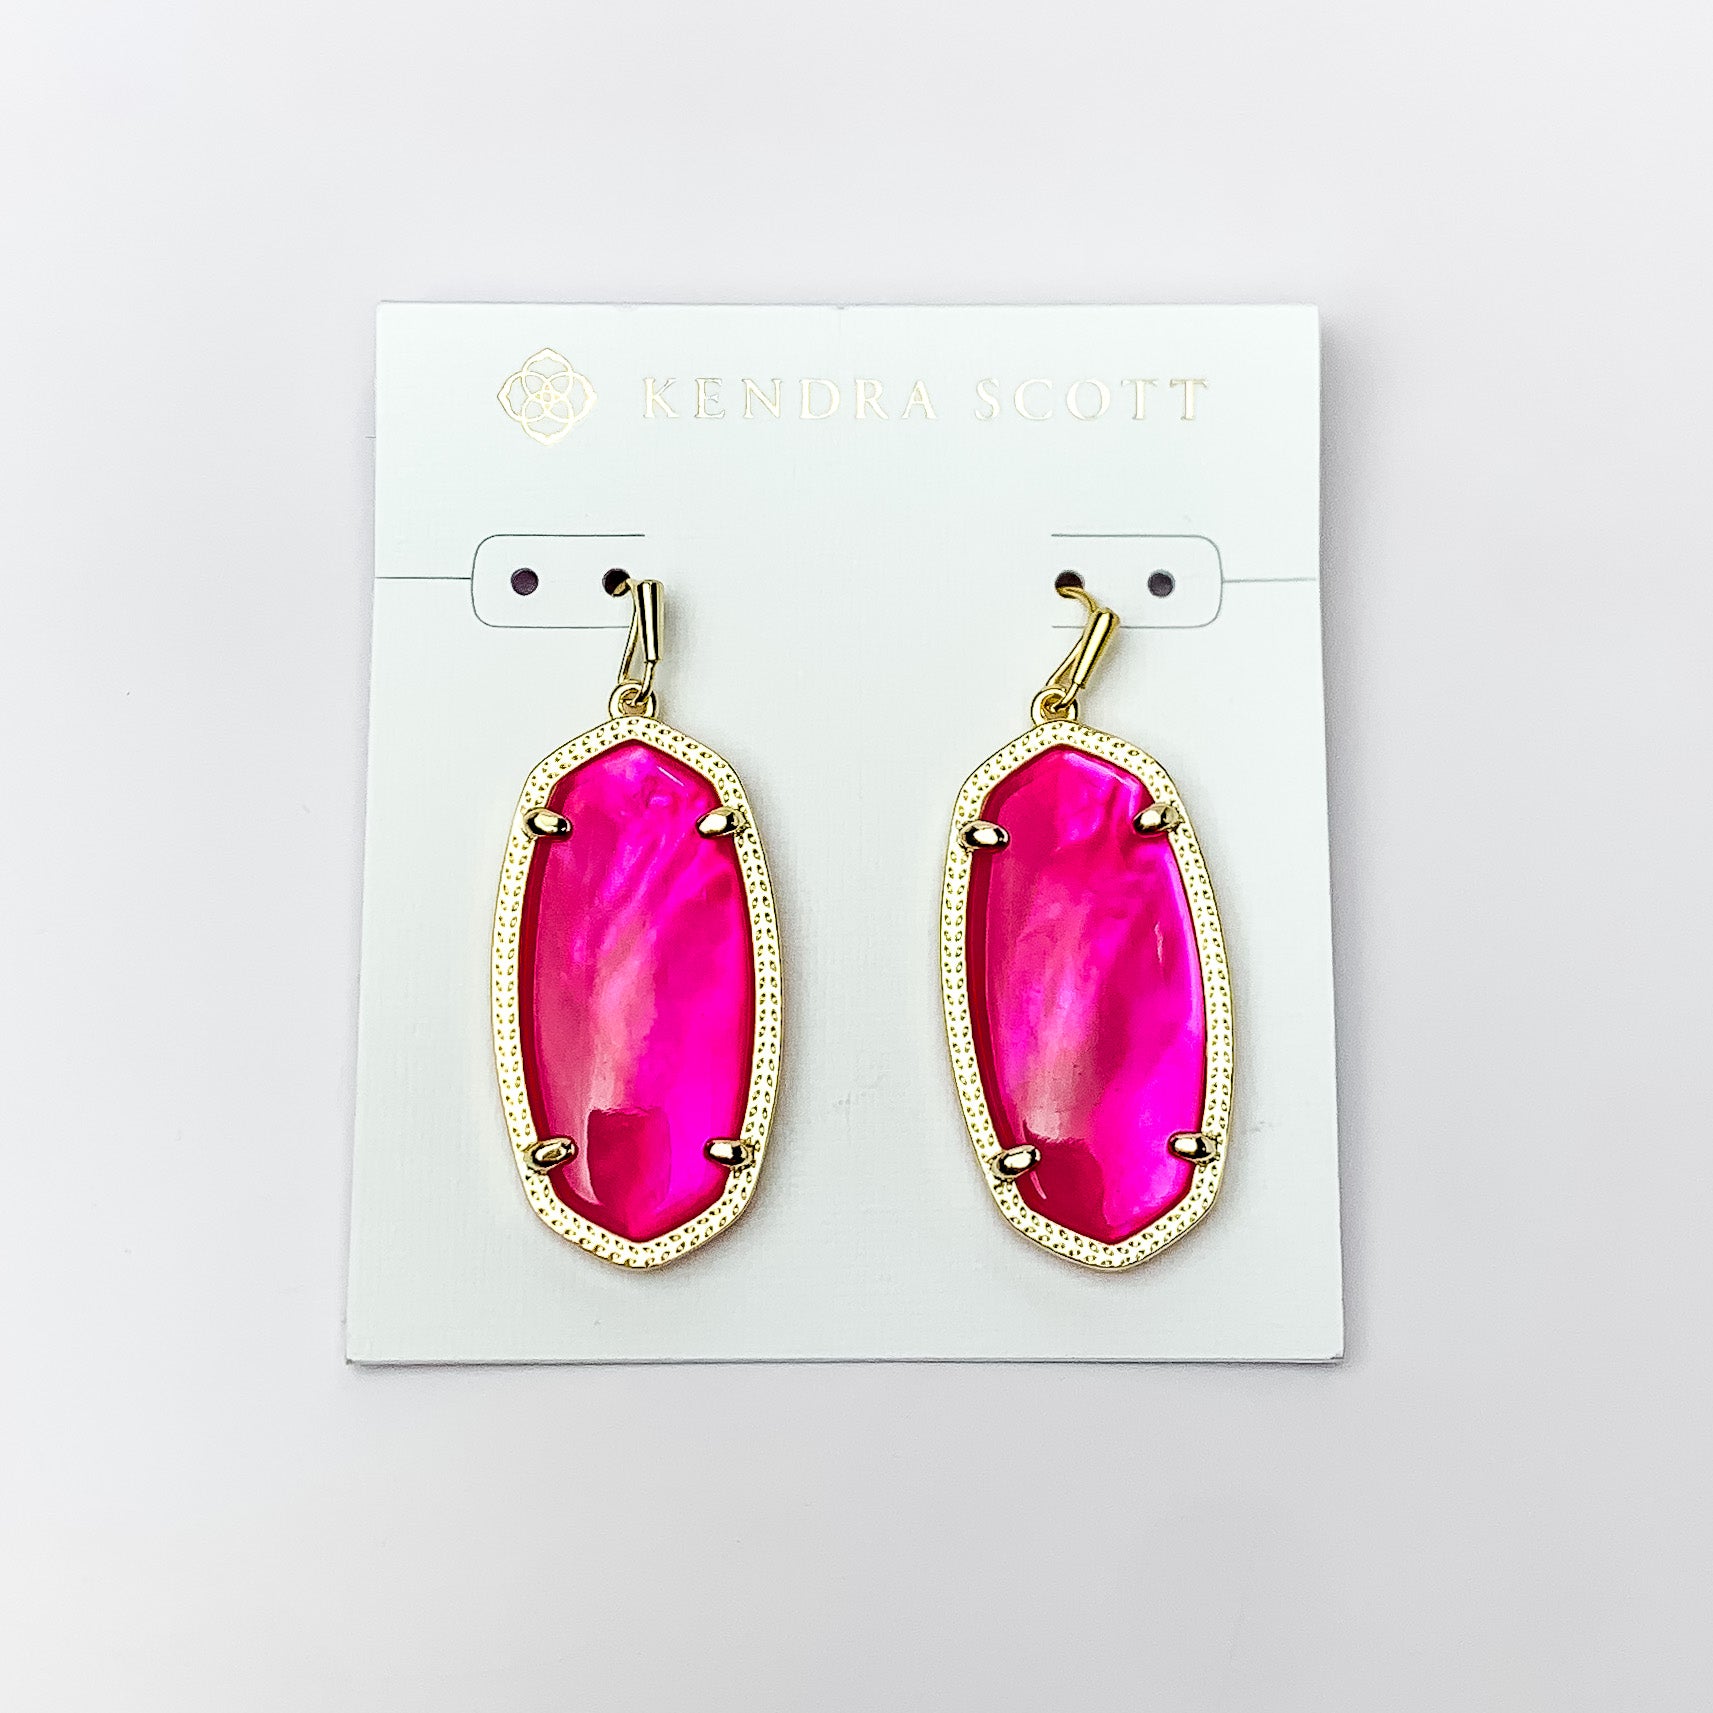 Gold oval drop earrings with a pink stone. These earrings are pictured on a white earring holder on a white background. 